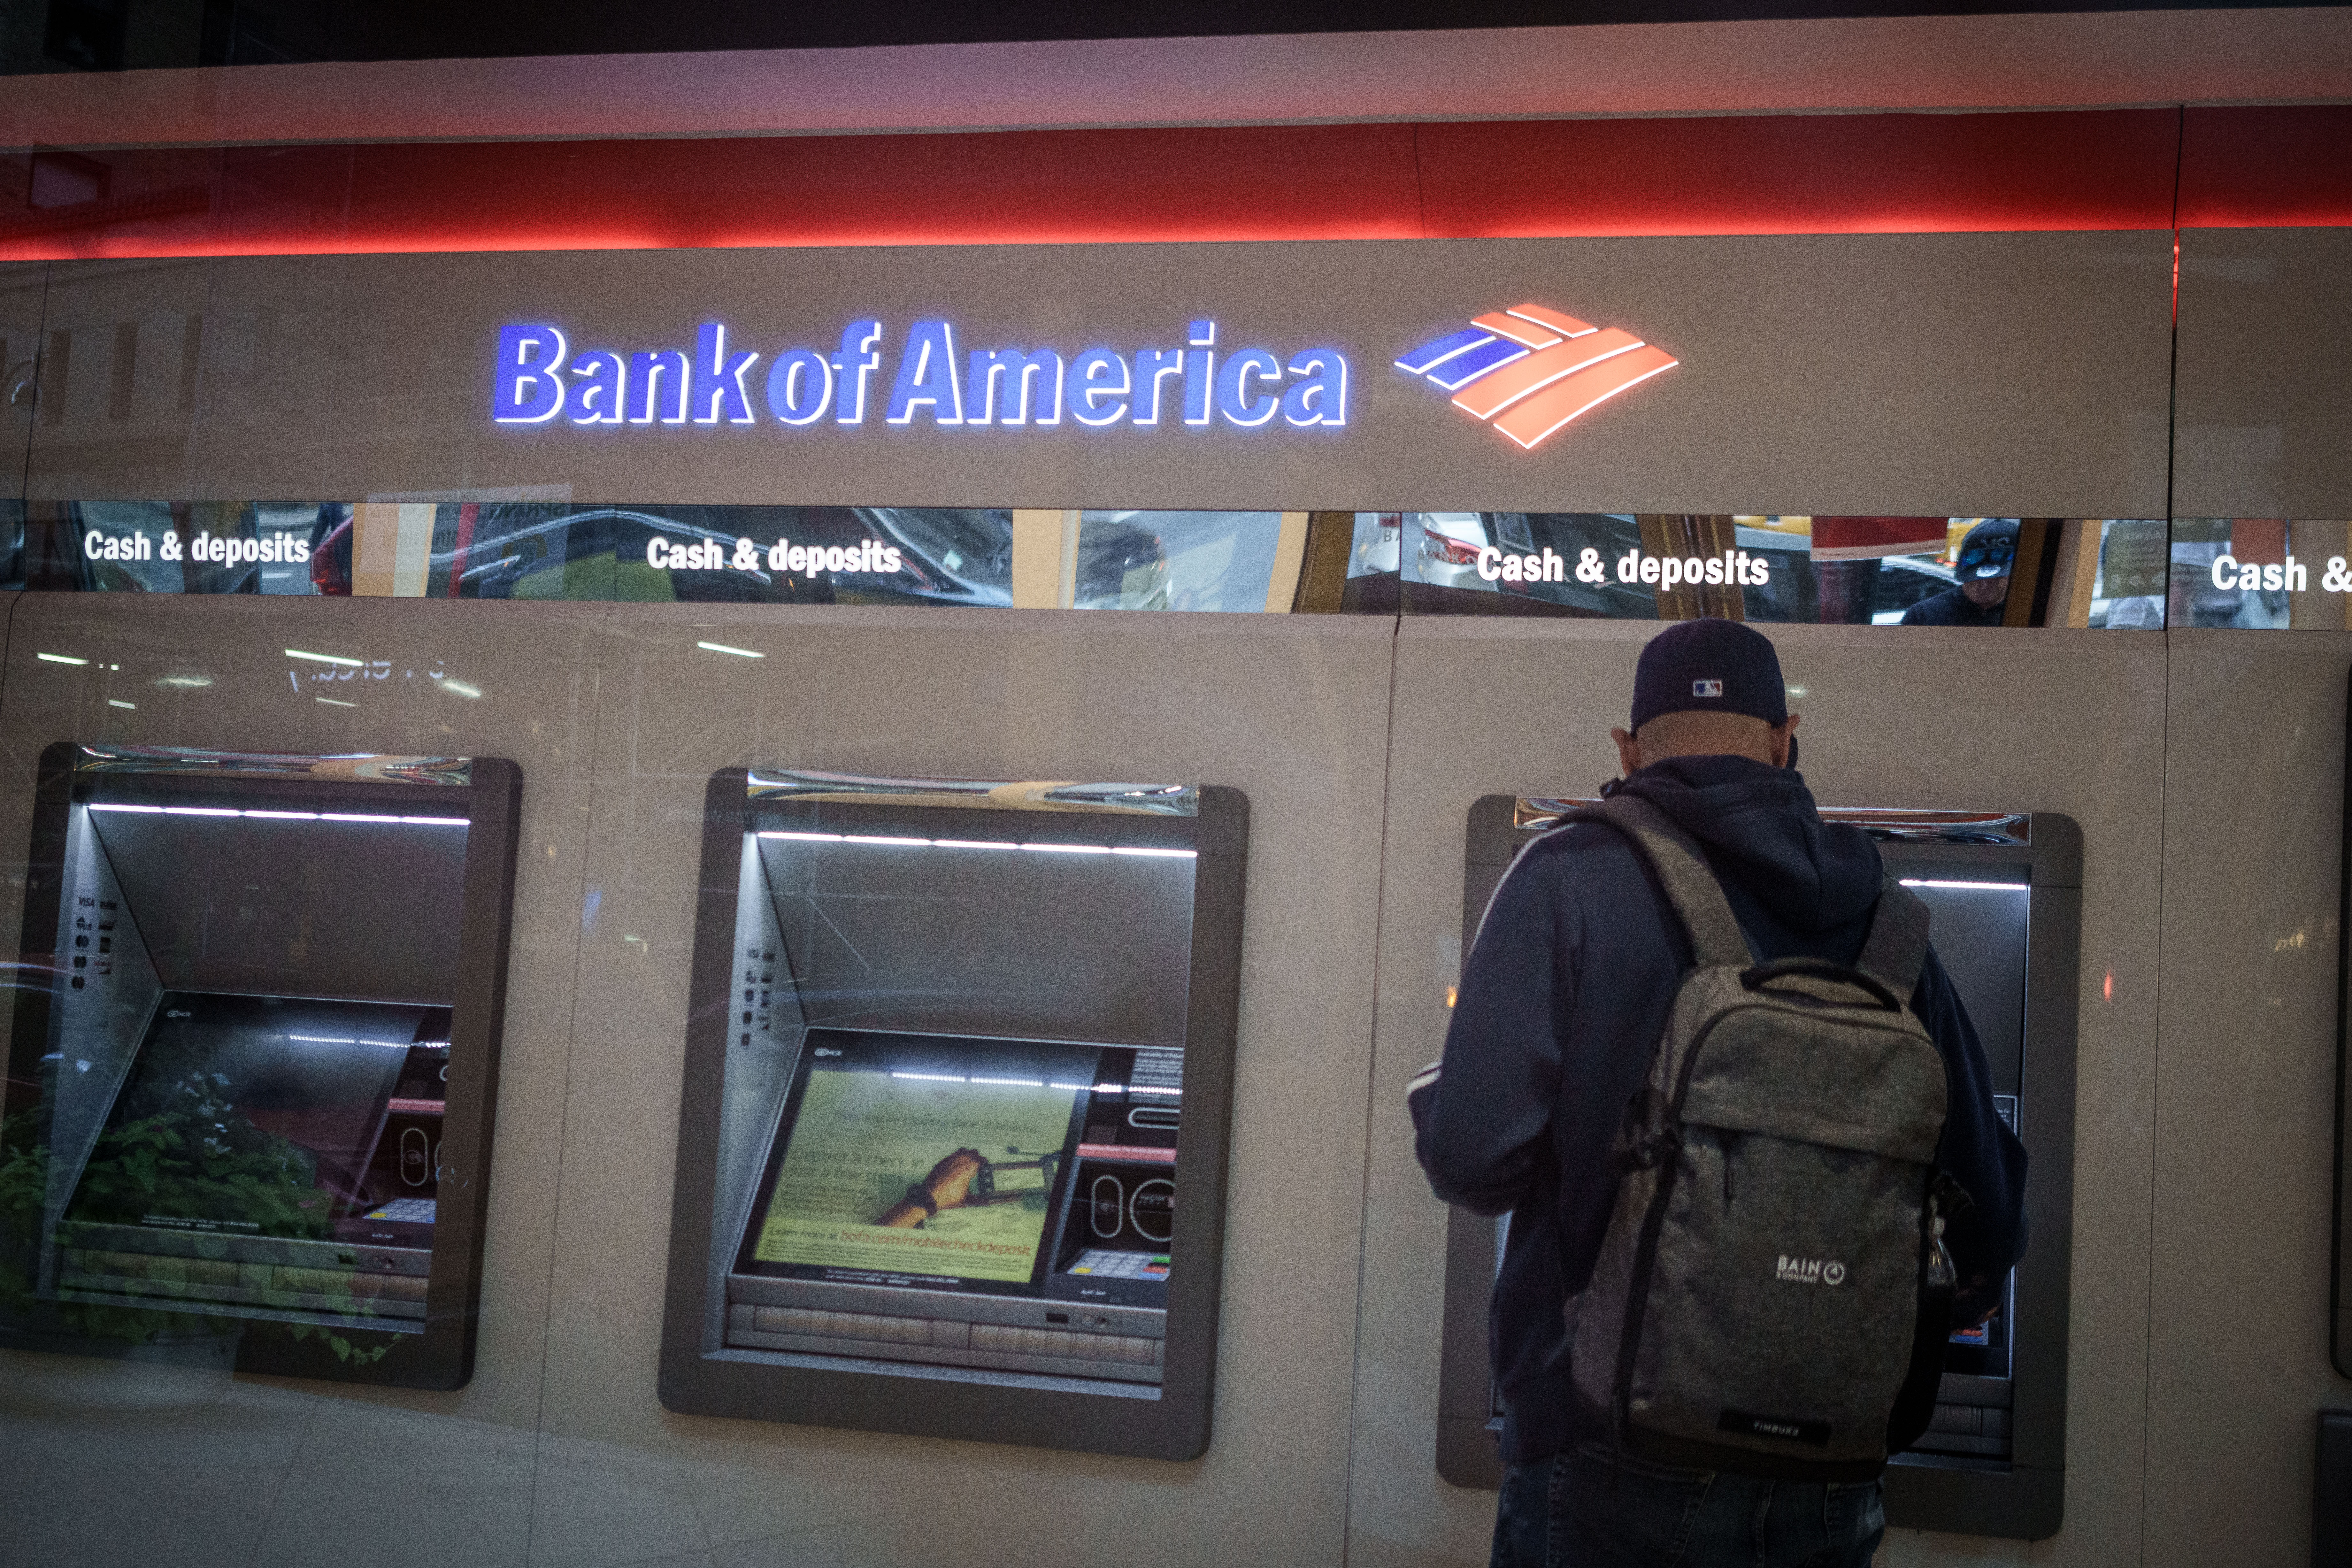 A person carrying a backpack stands at a Bank of America ATM.